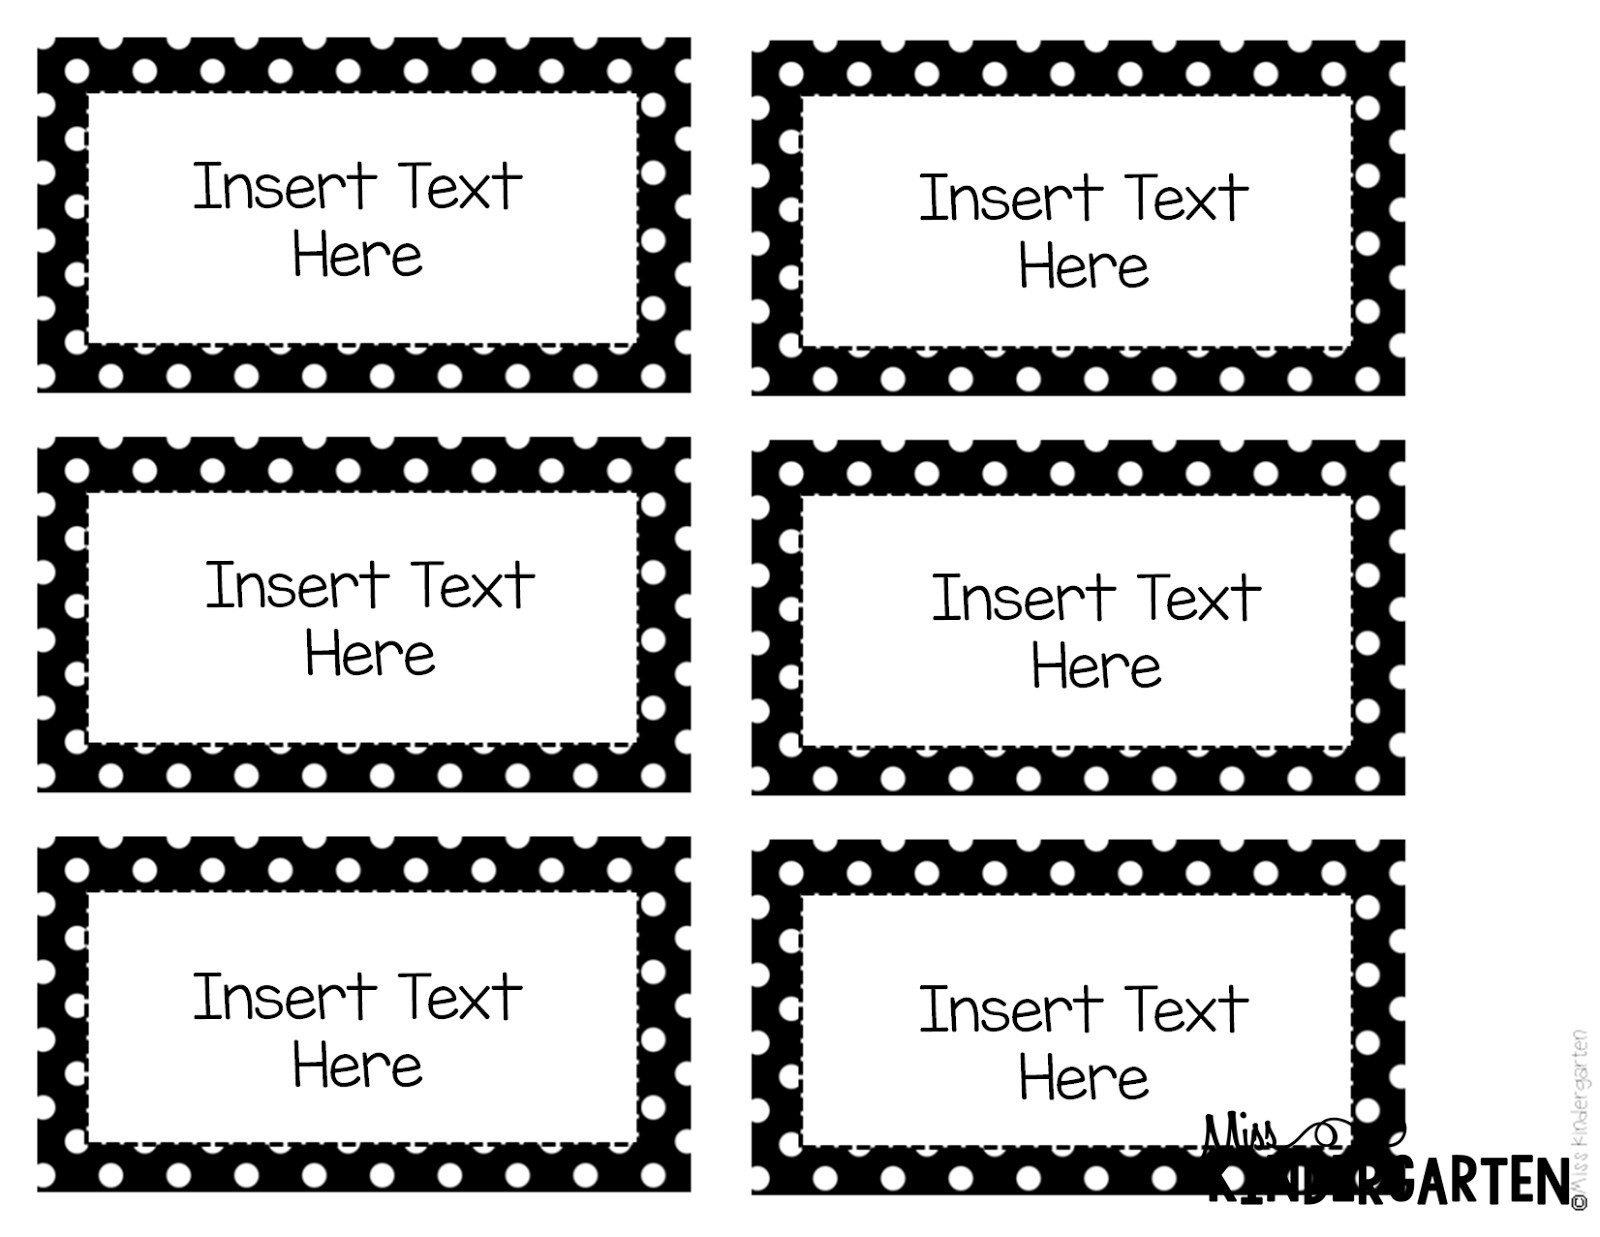 Free Printable Label Templates | Chart And Printable World - Free Printable Label Templates For Word